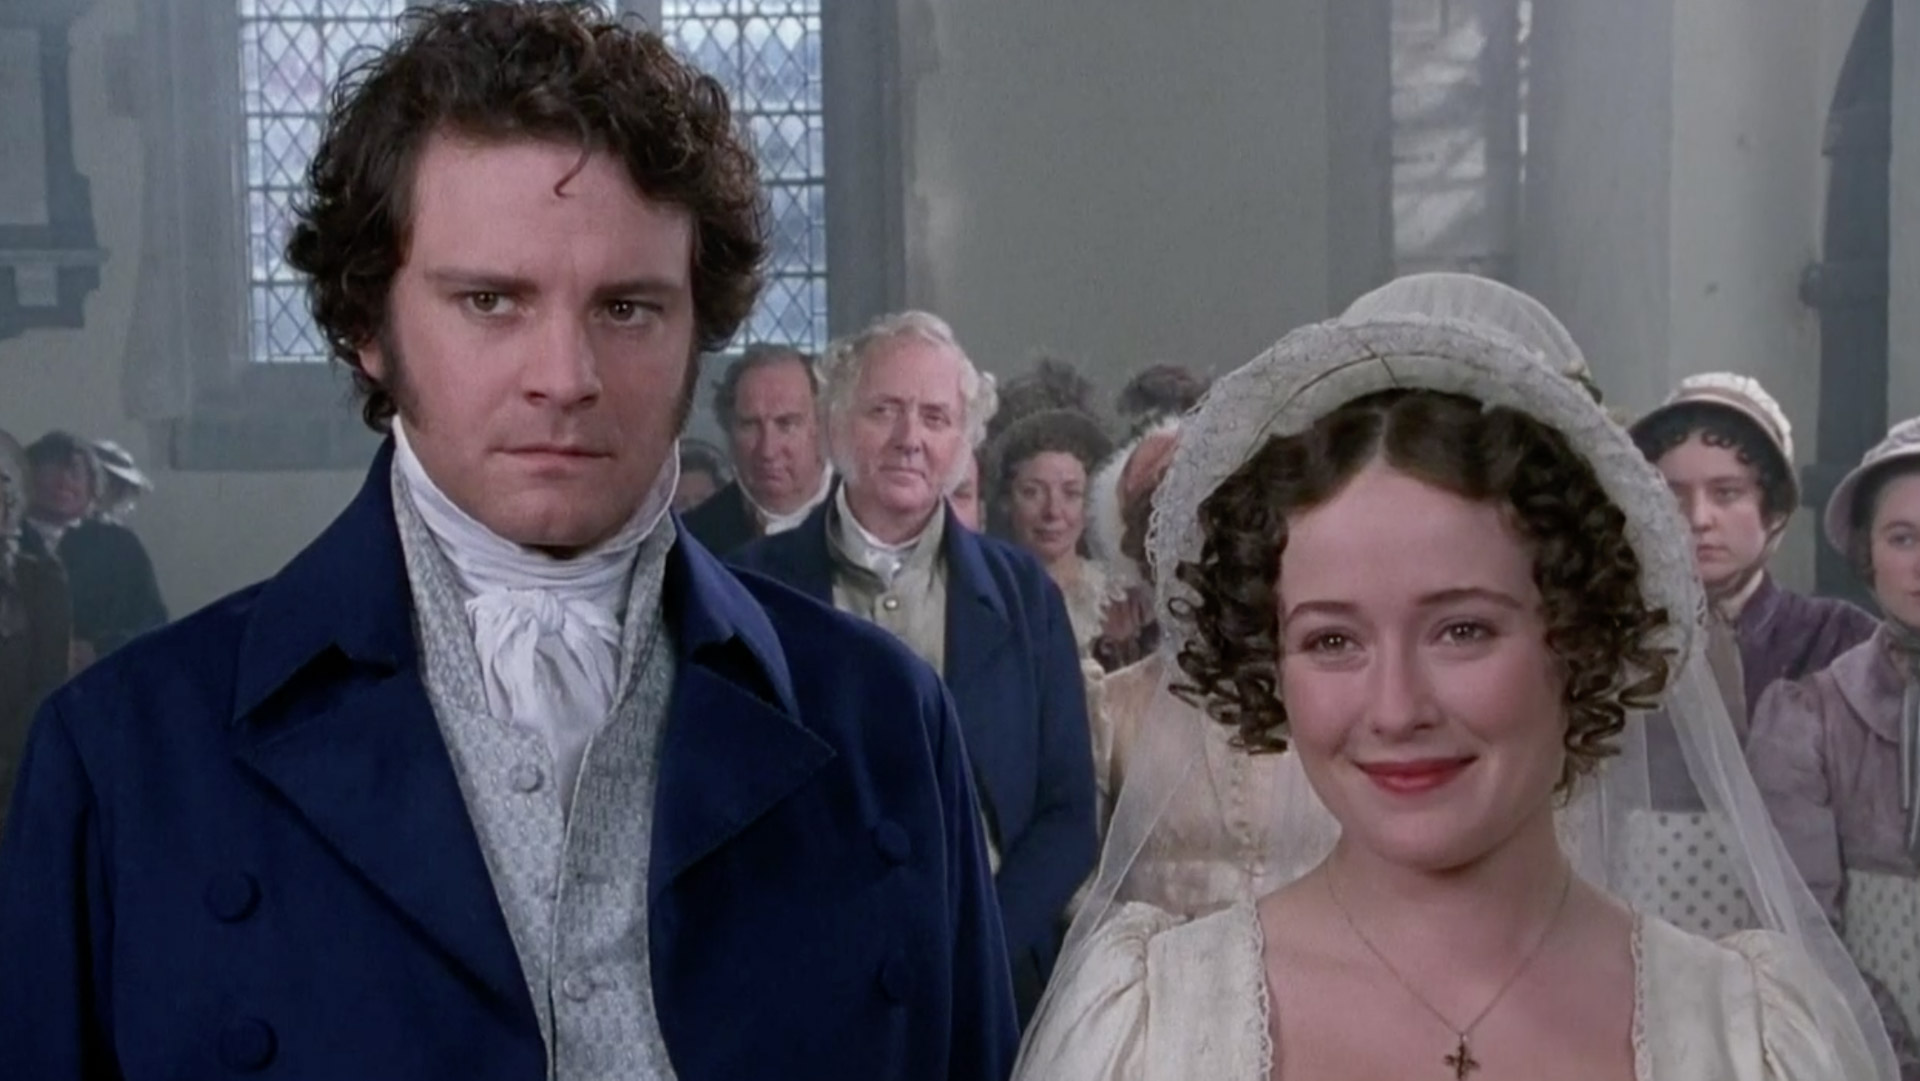 Colin Firth and Jennifer Ehle in Pride and Prejudice. 